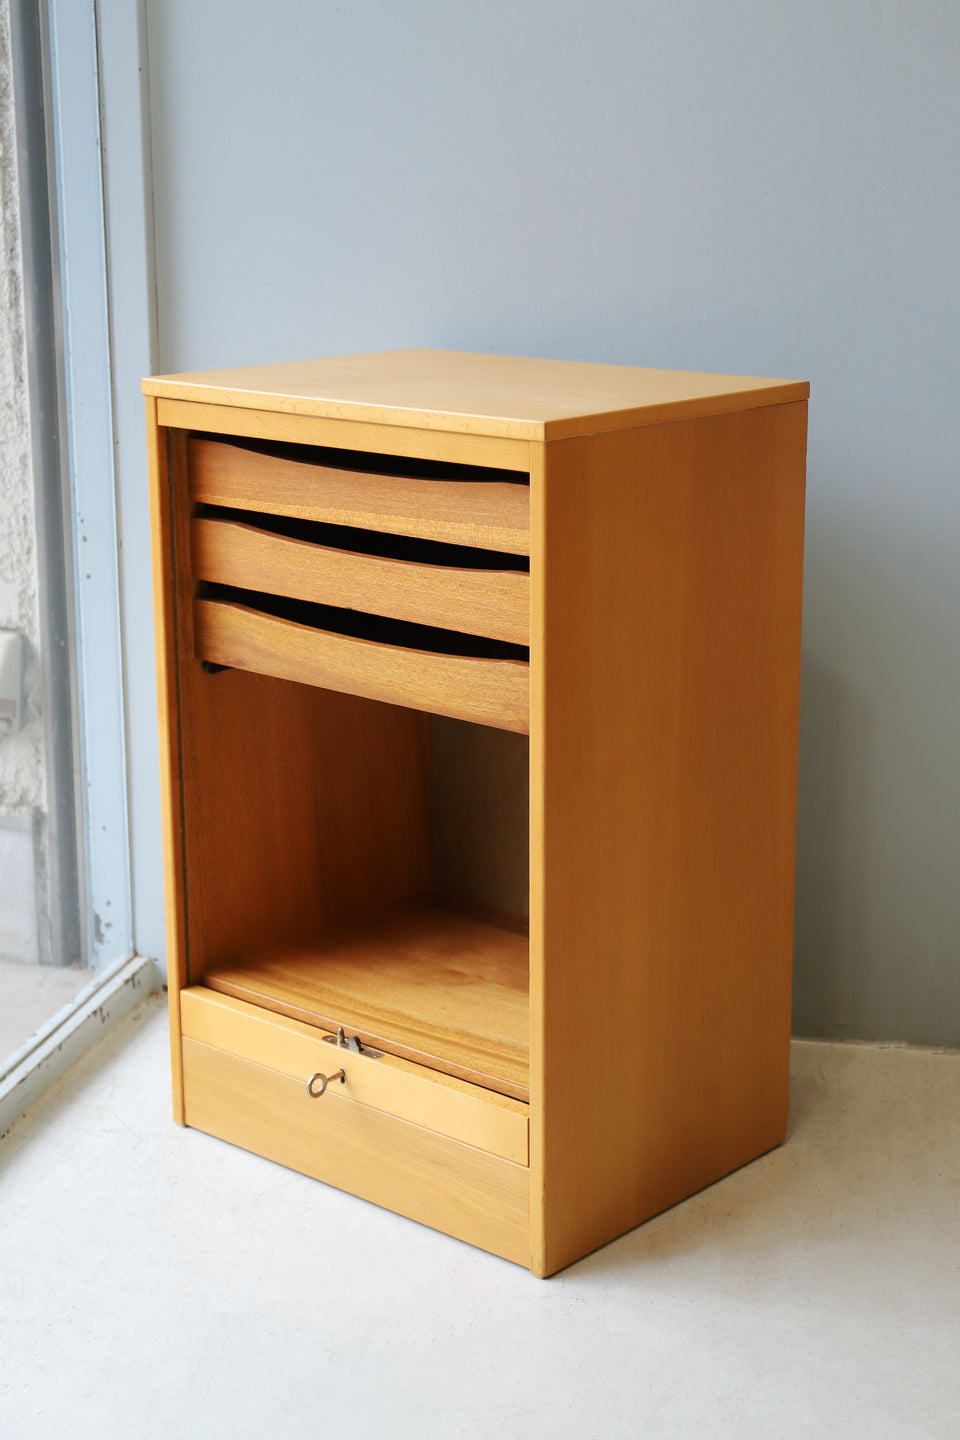 Roll Up File Cabinet Scandinavian Vintage/デンマークヴィンテージ ロールアップ ファイルキャビネット 蛇腹 北欧家具